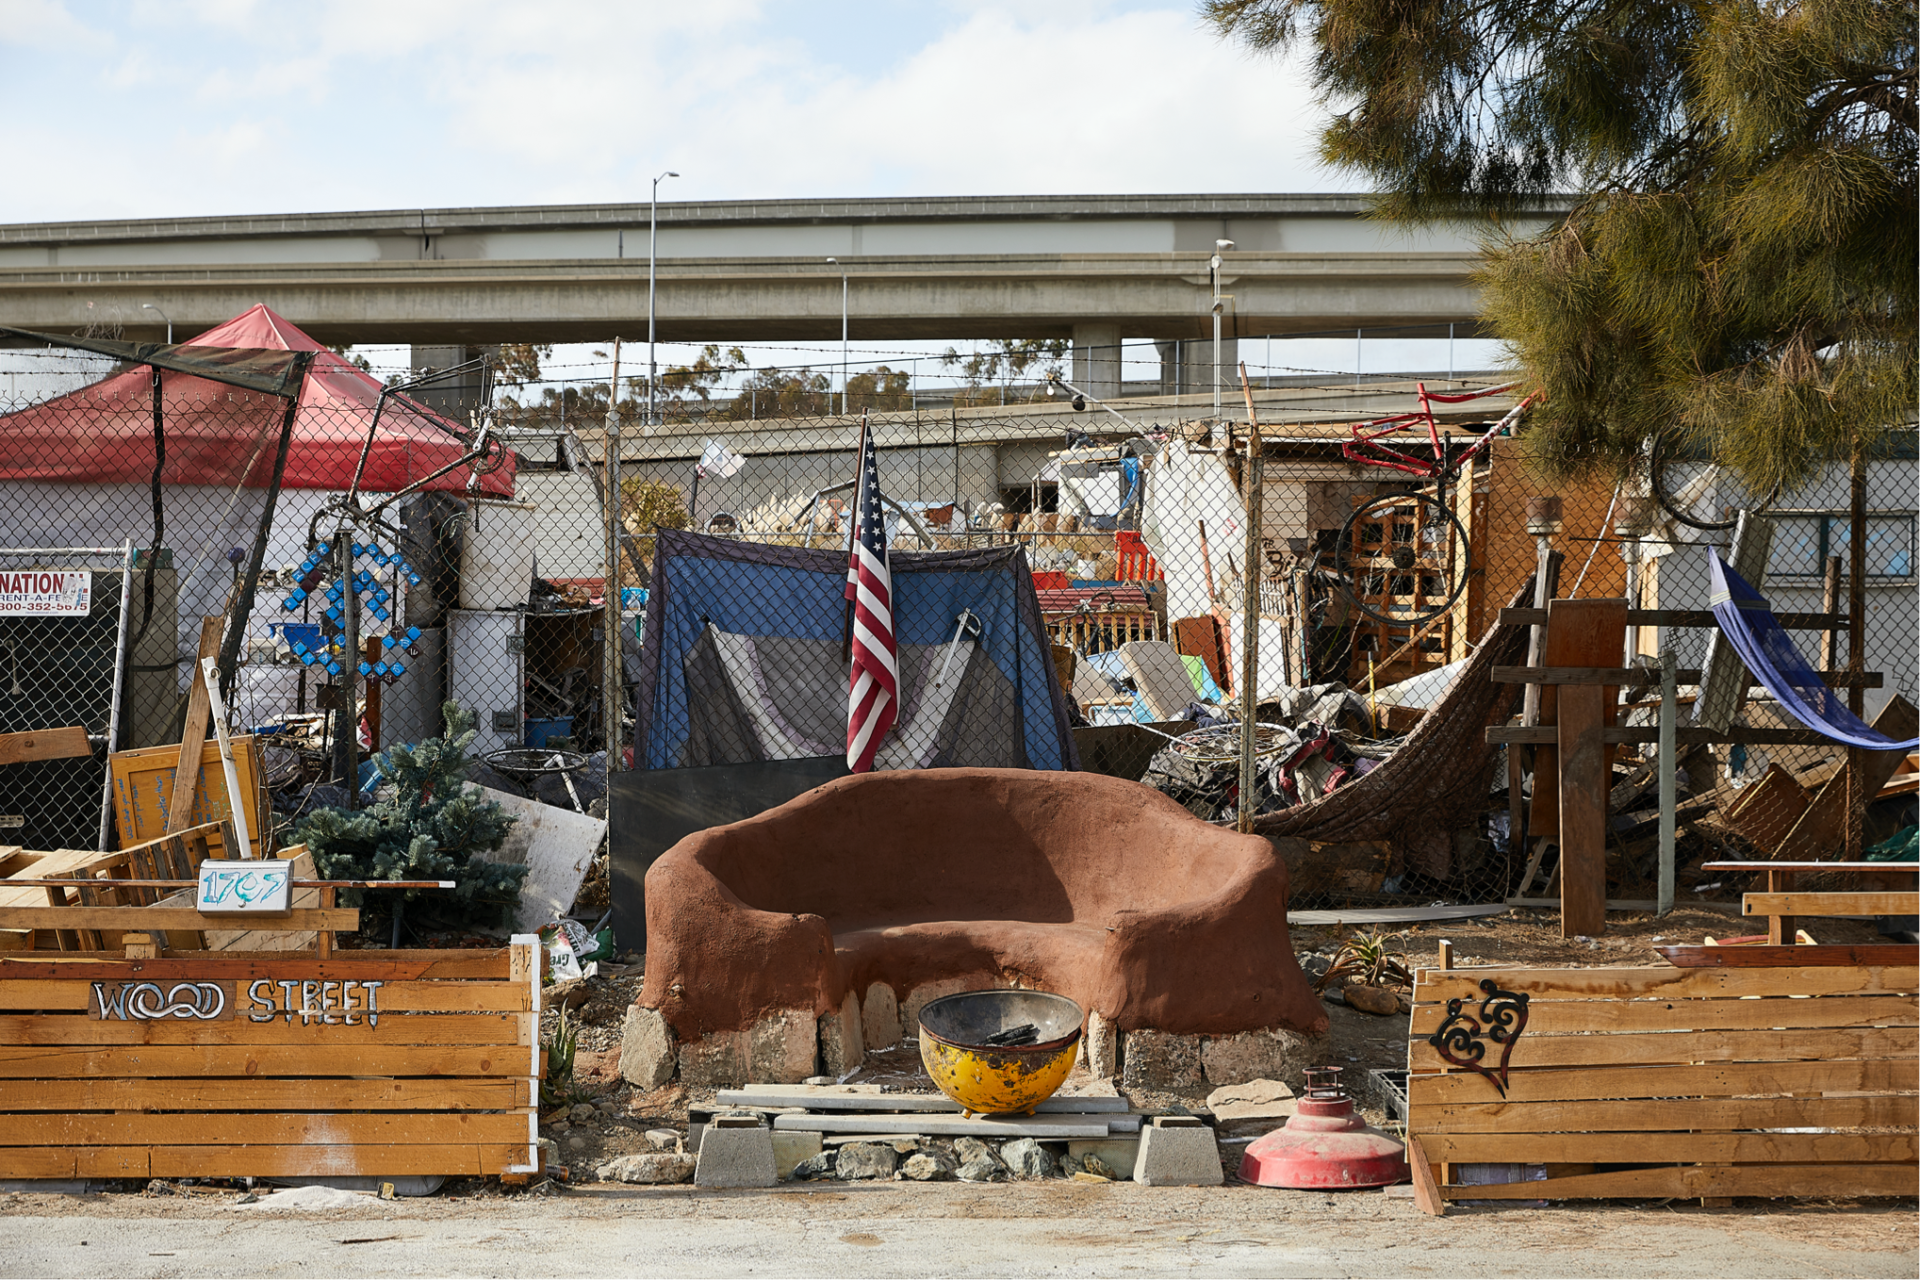 A photograph of the Wood Street encampments, which are surrounded by illegally dumped garbage from across Oakland